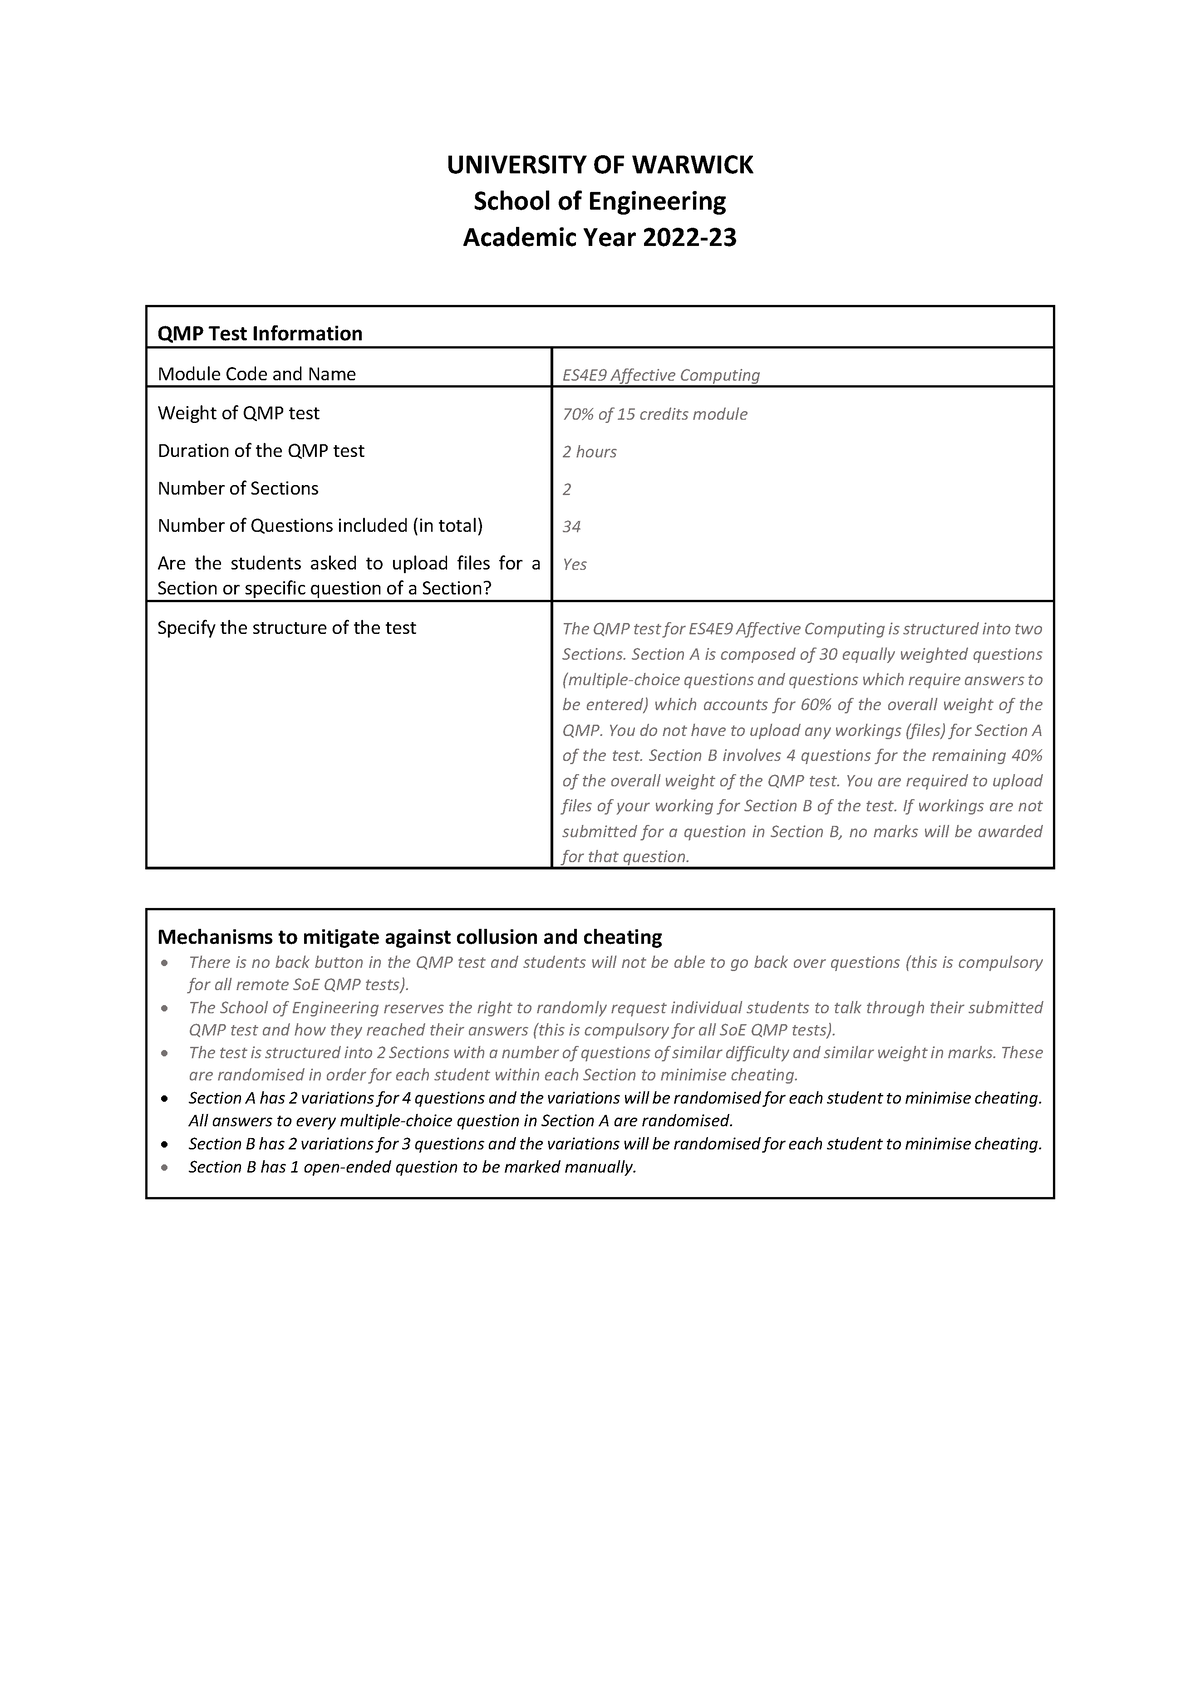 es4e9-sample-qmp-with-marking-guidelines-2022-23-university-of